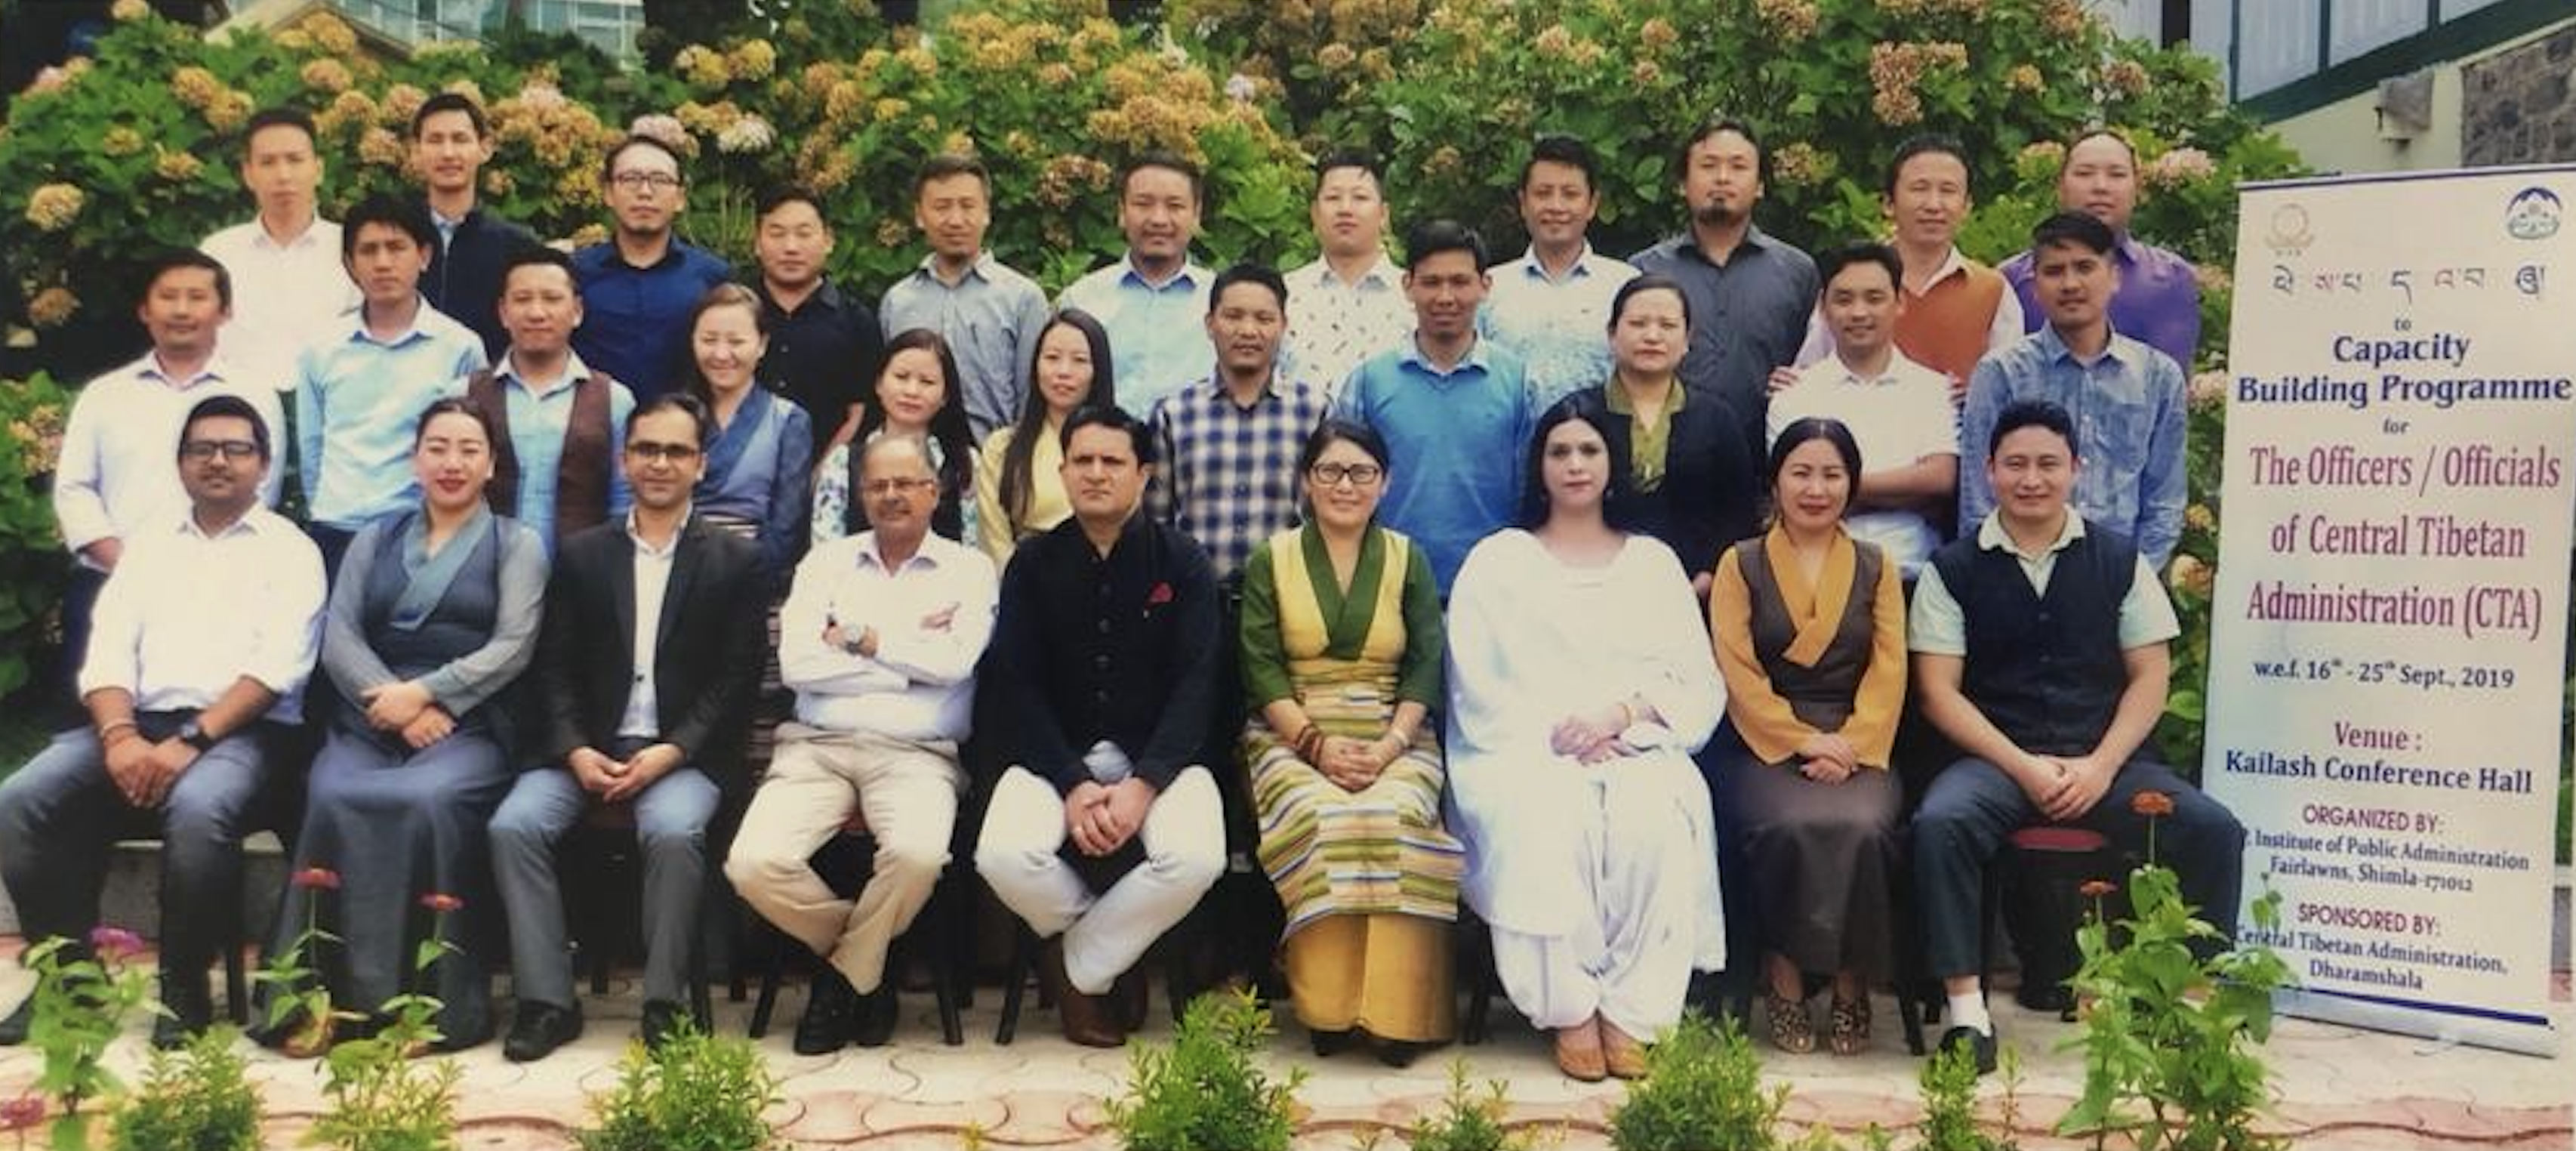 CTA staff at Capacity building programme, organised by Institute of Public Administration, Shimla, 2019. 